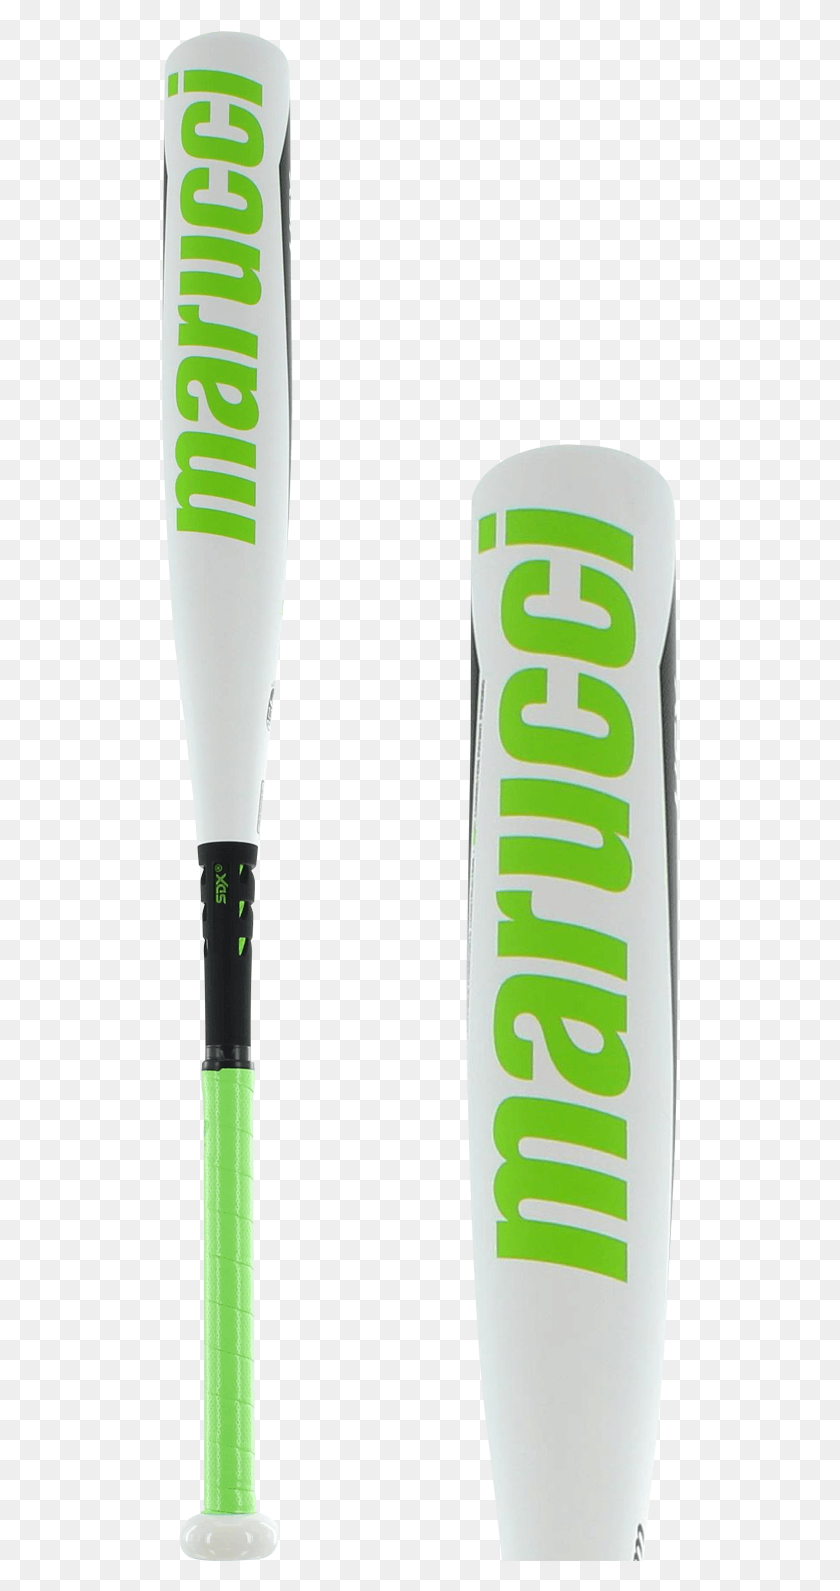 519x1531 New Marucci Msbhcy10 2818 Hex Connect 2 58 Senior Paddle Tennis, Deporte, Deportes, Deporte De Equipo Hd Png